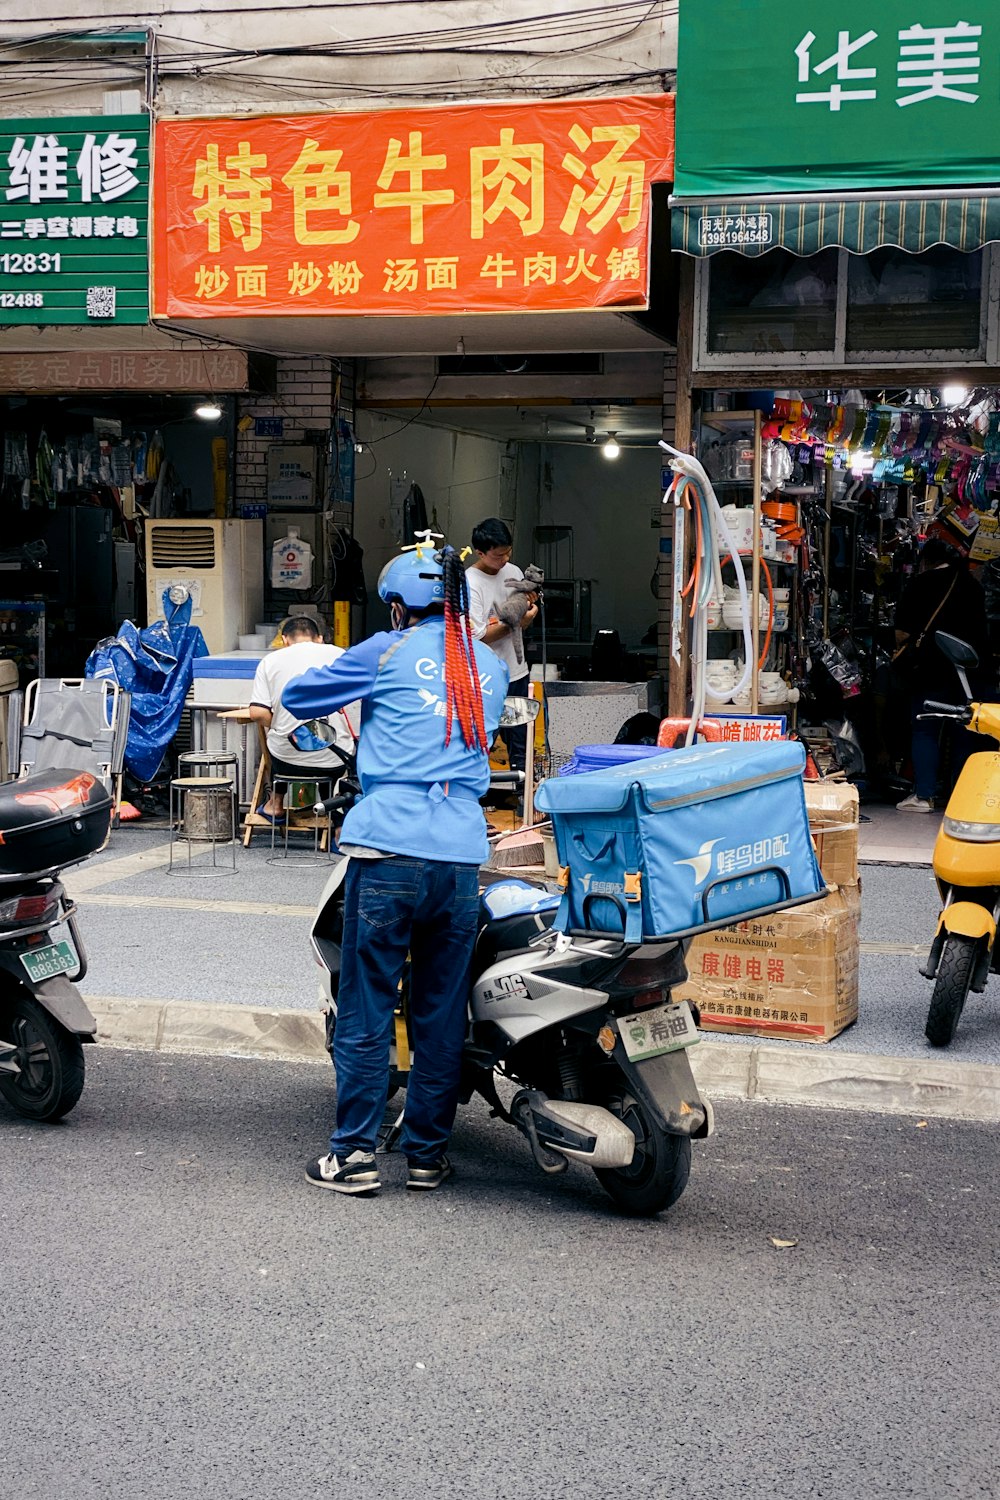 a man standing next to a scooter on a street